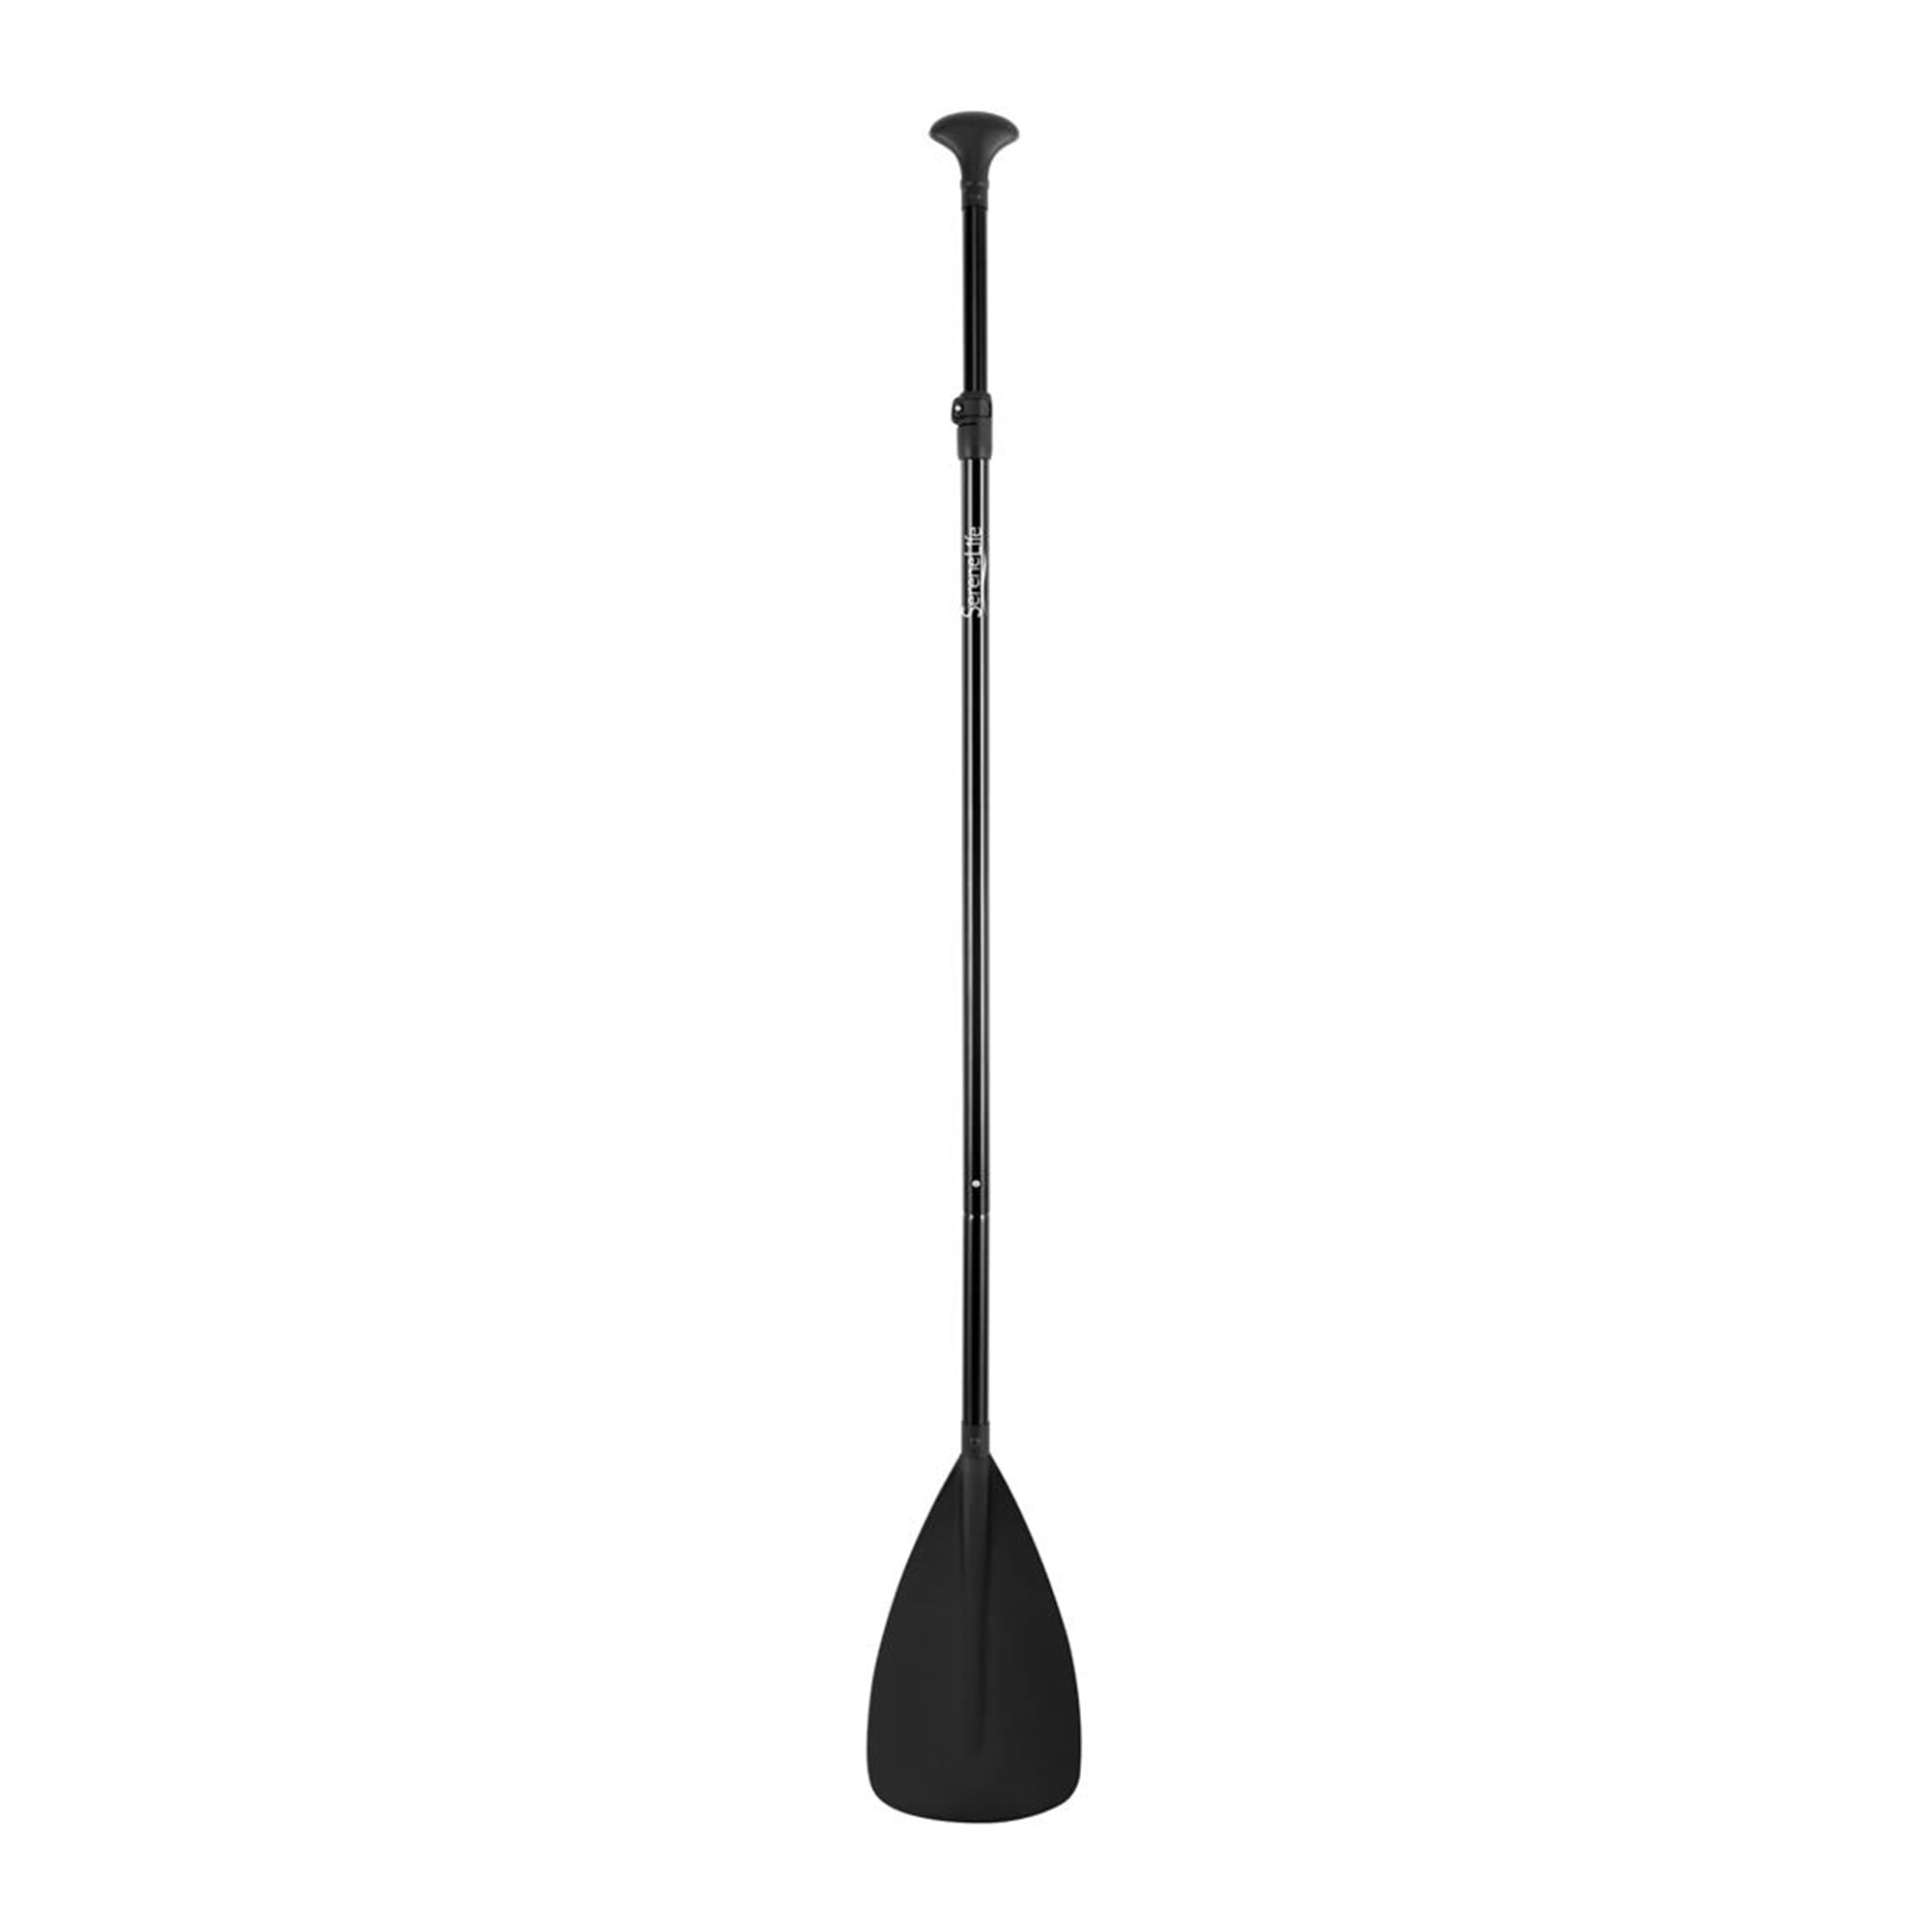 Serenelife Universal Oar with Adjustable Height for Stand Up Paddle Boards